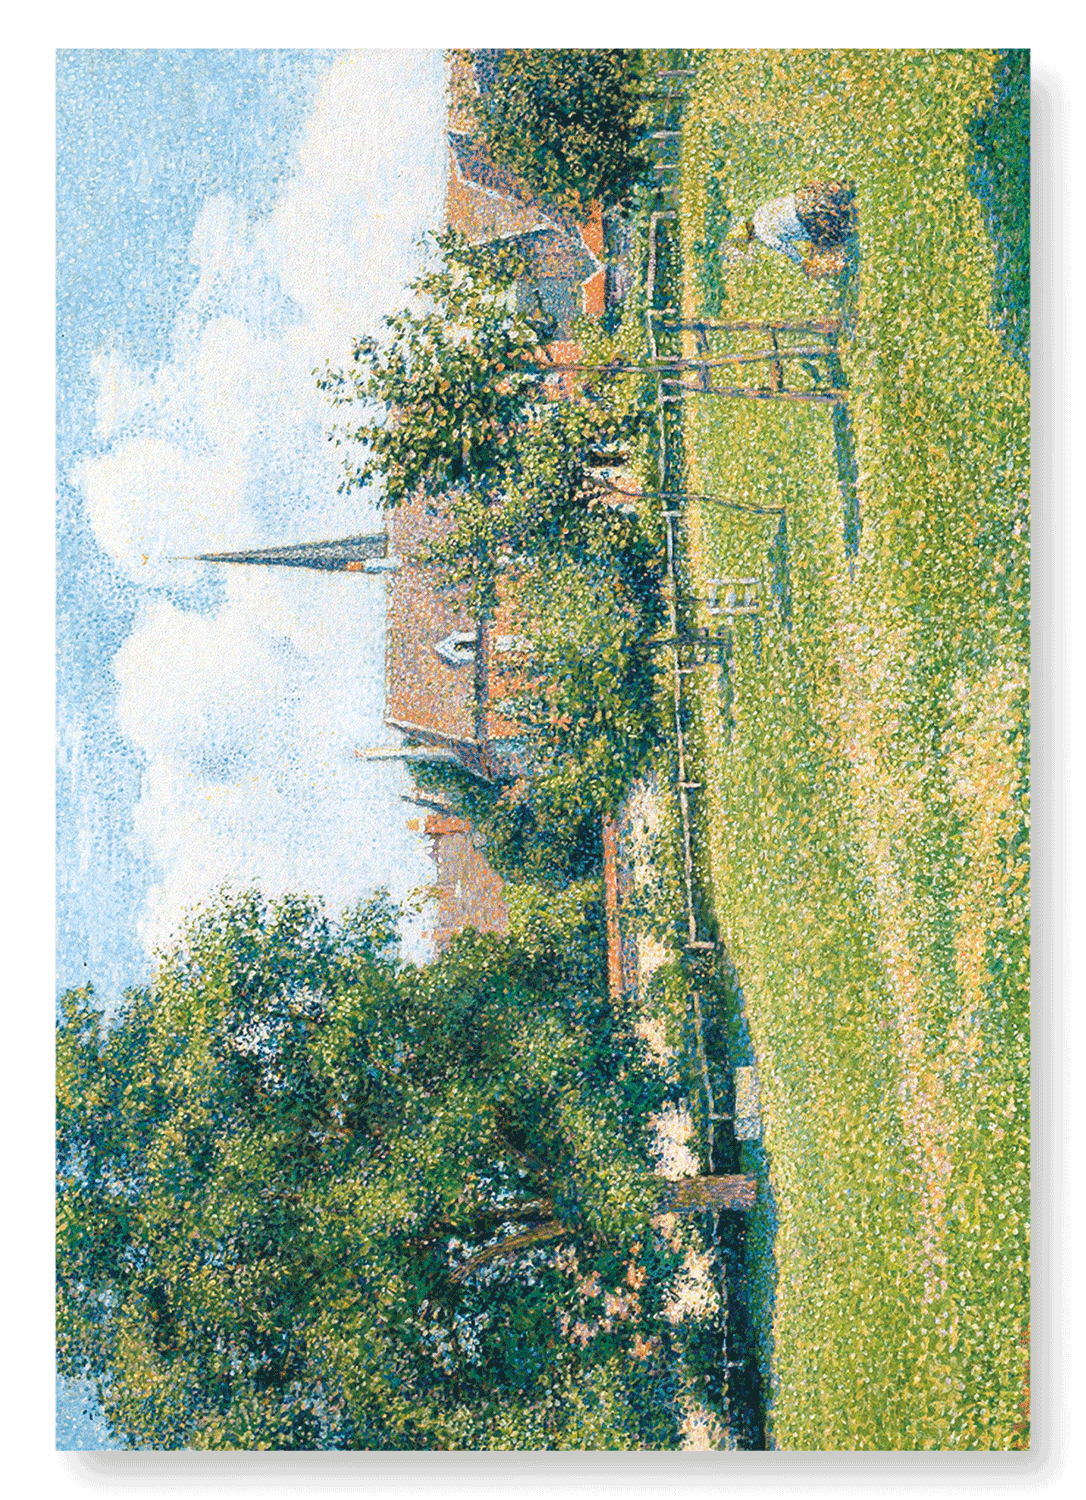 THE HOUSE OF THE DEAF WOMAN AND THE BELFRY AT ERAGNY (1886): Painting Art Print